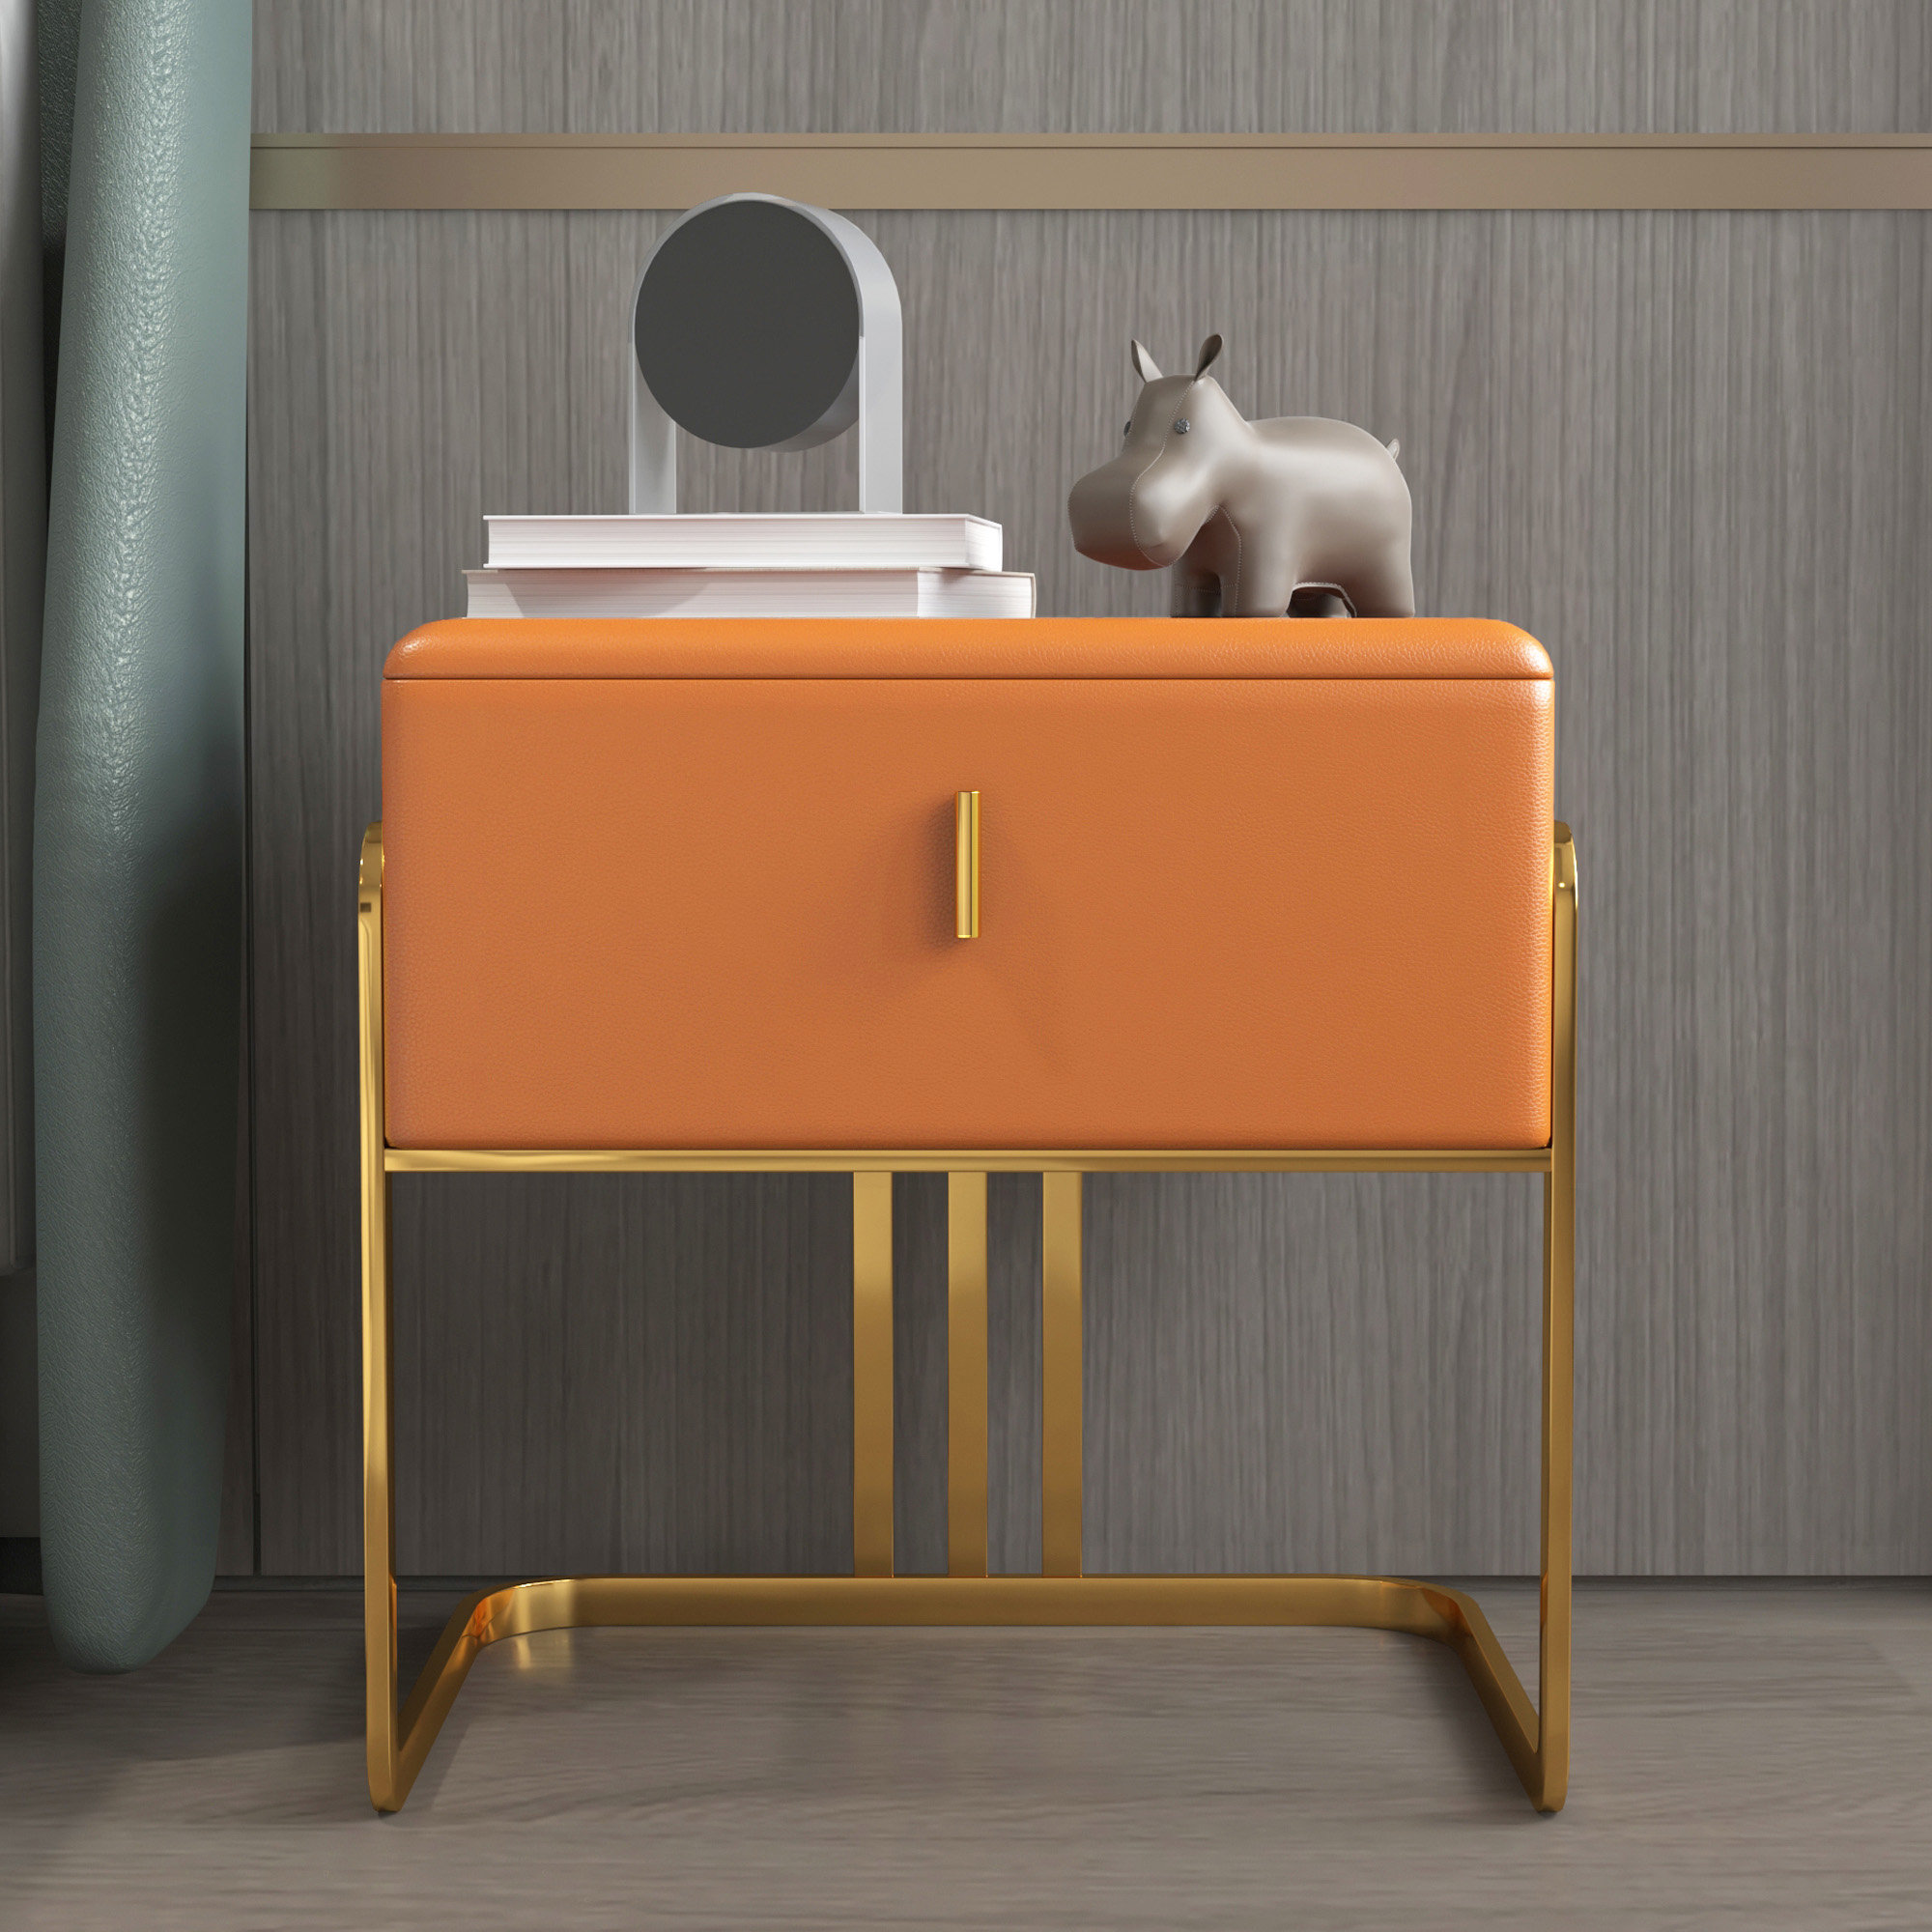 Lavale Nightstand